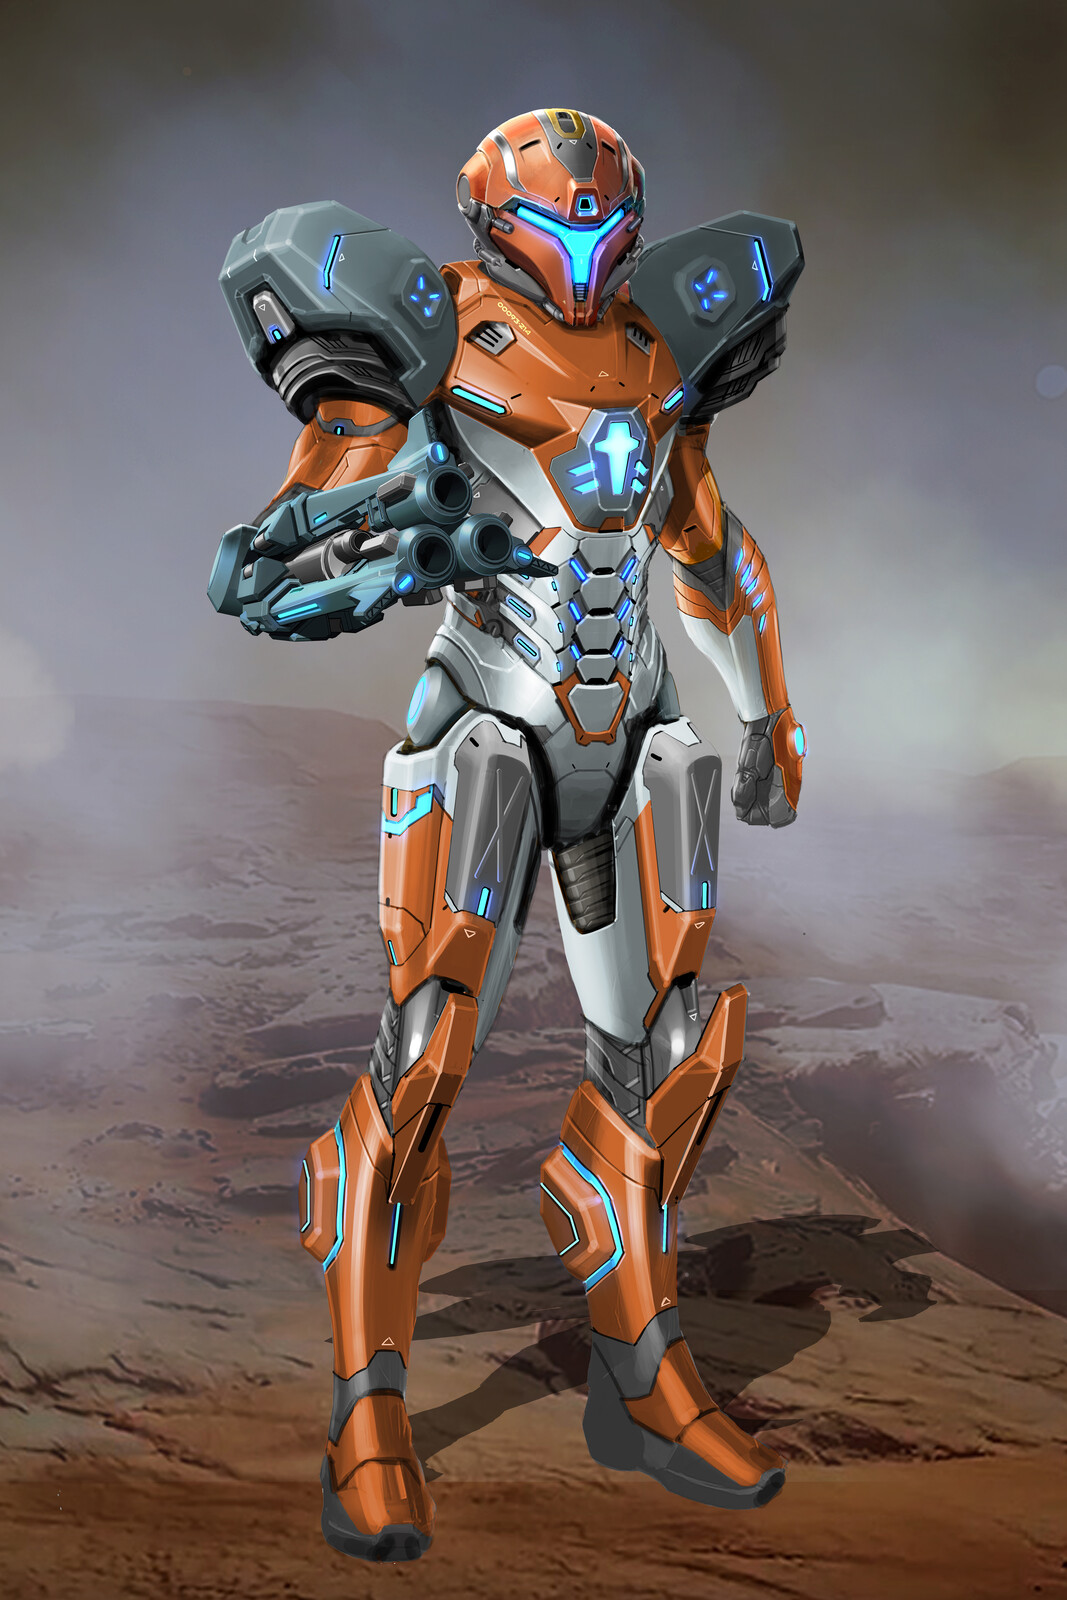 Redesign of Metroid Prime 3's PED suit. 